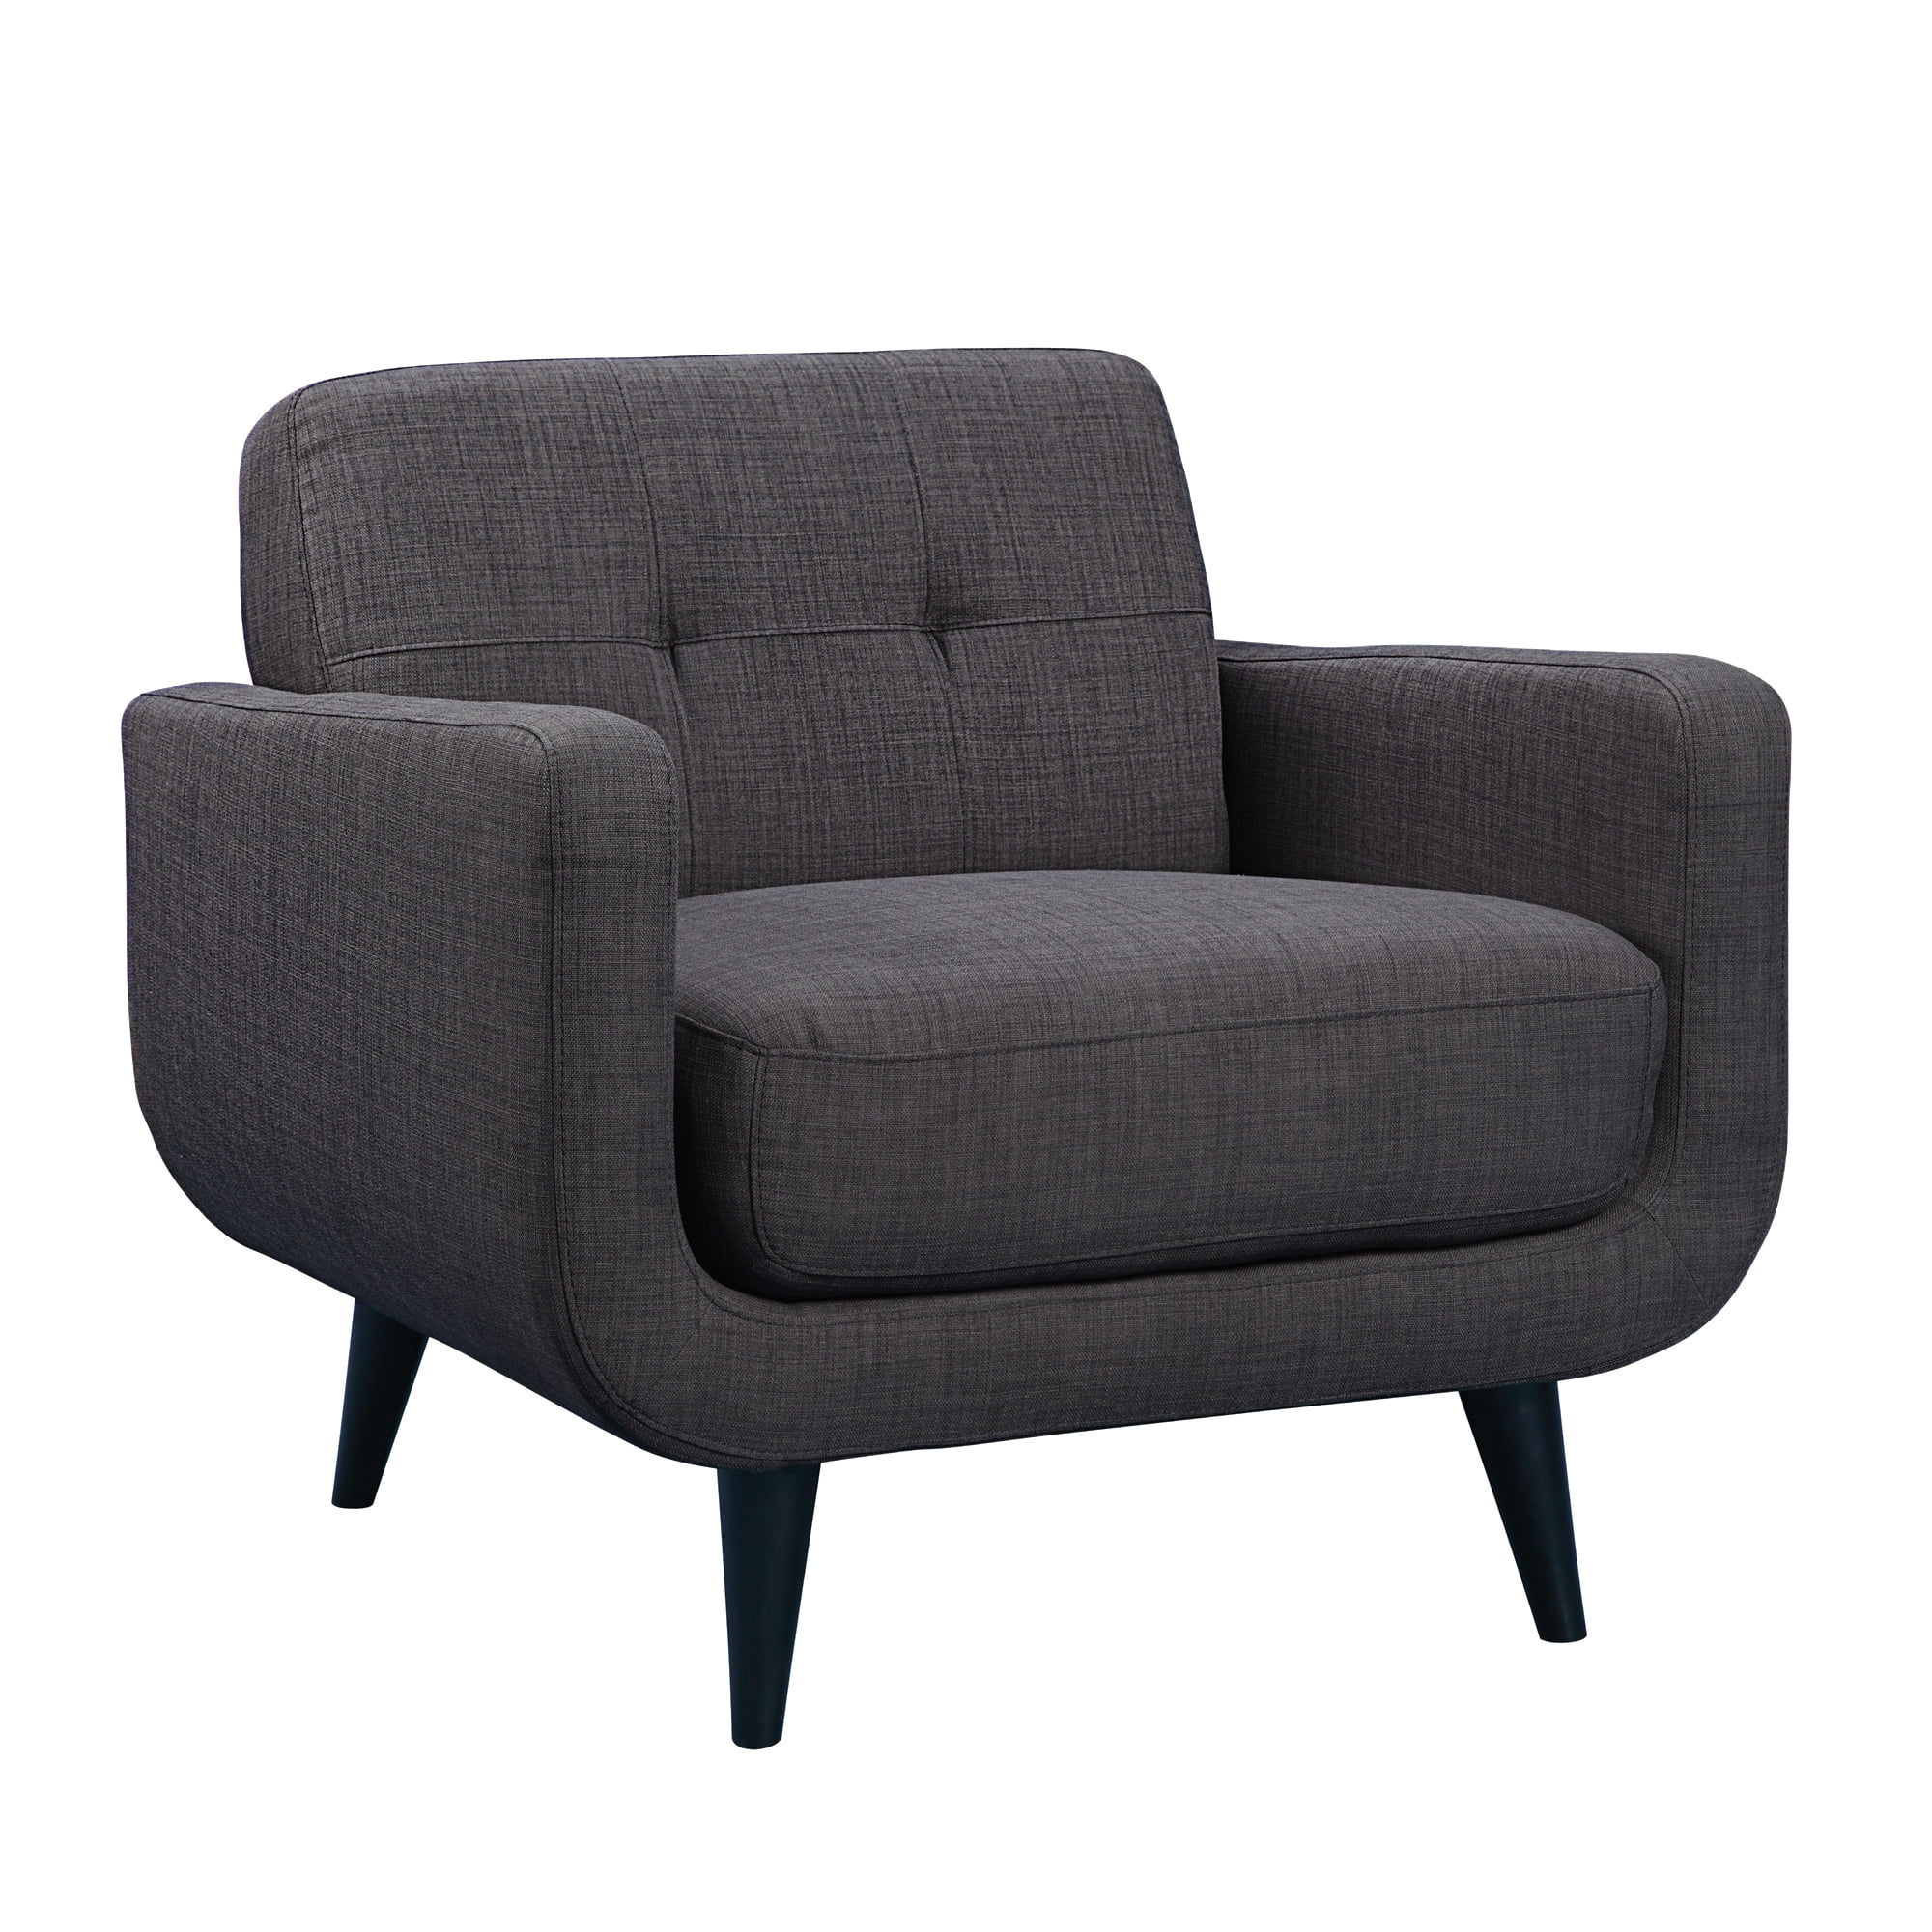 Picket House Furnishings Hailey Sofa /& Loveseat Set in Charcoal